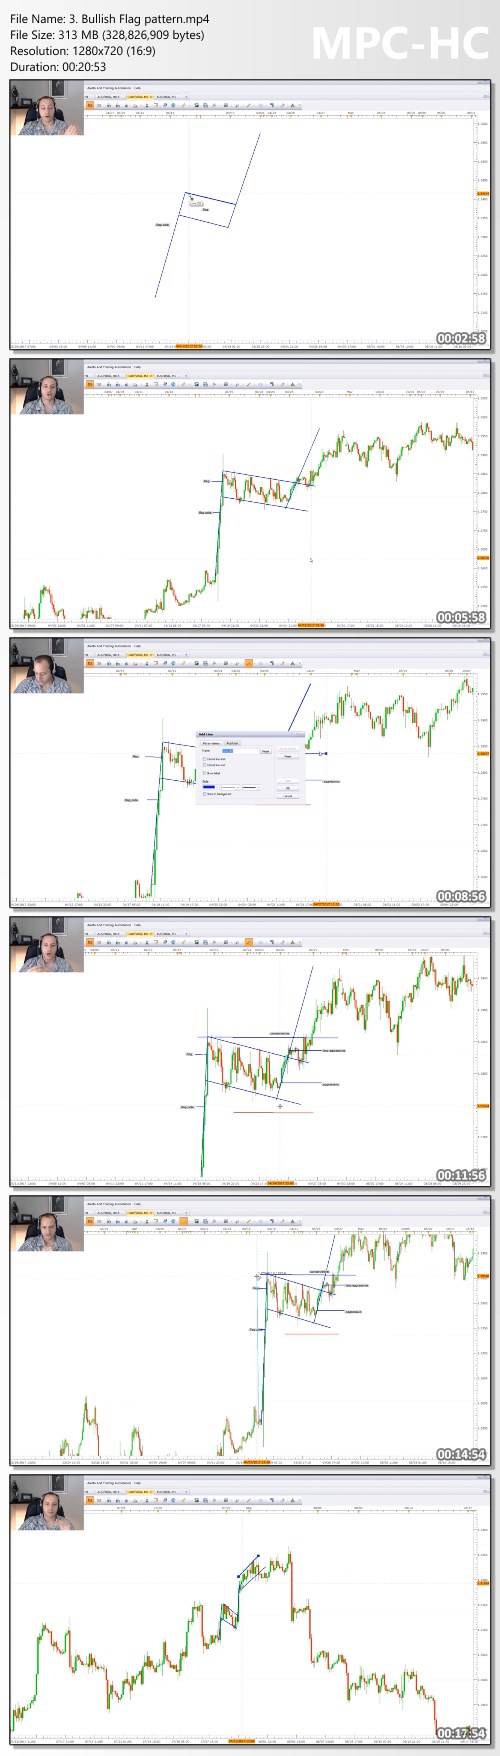 From complete beginner to consistent Forex professional by Dylan Bosch